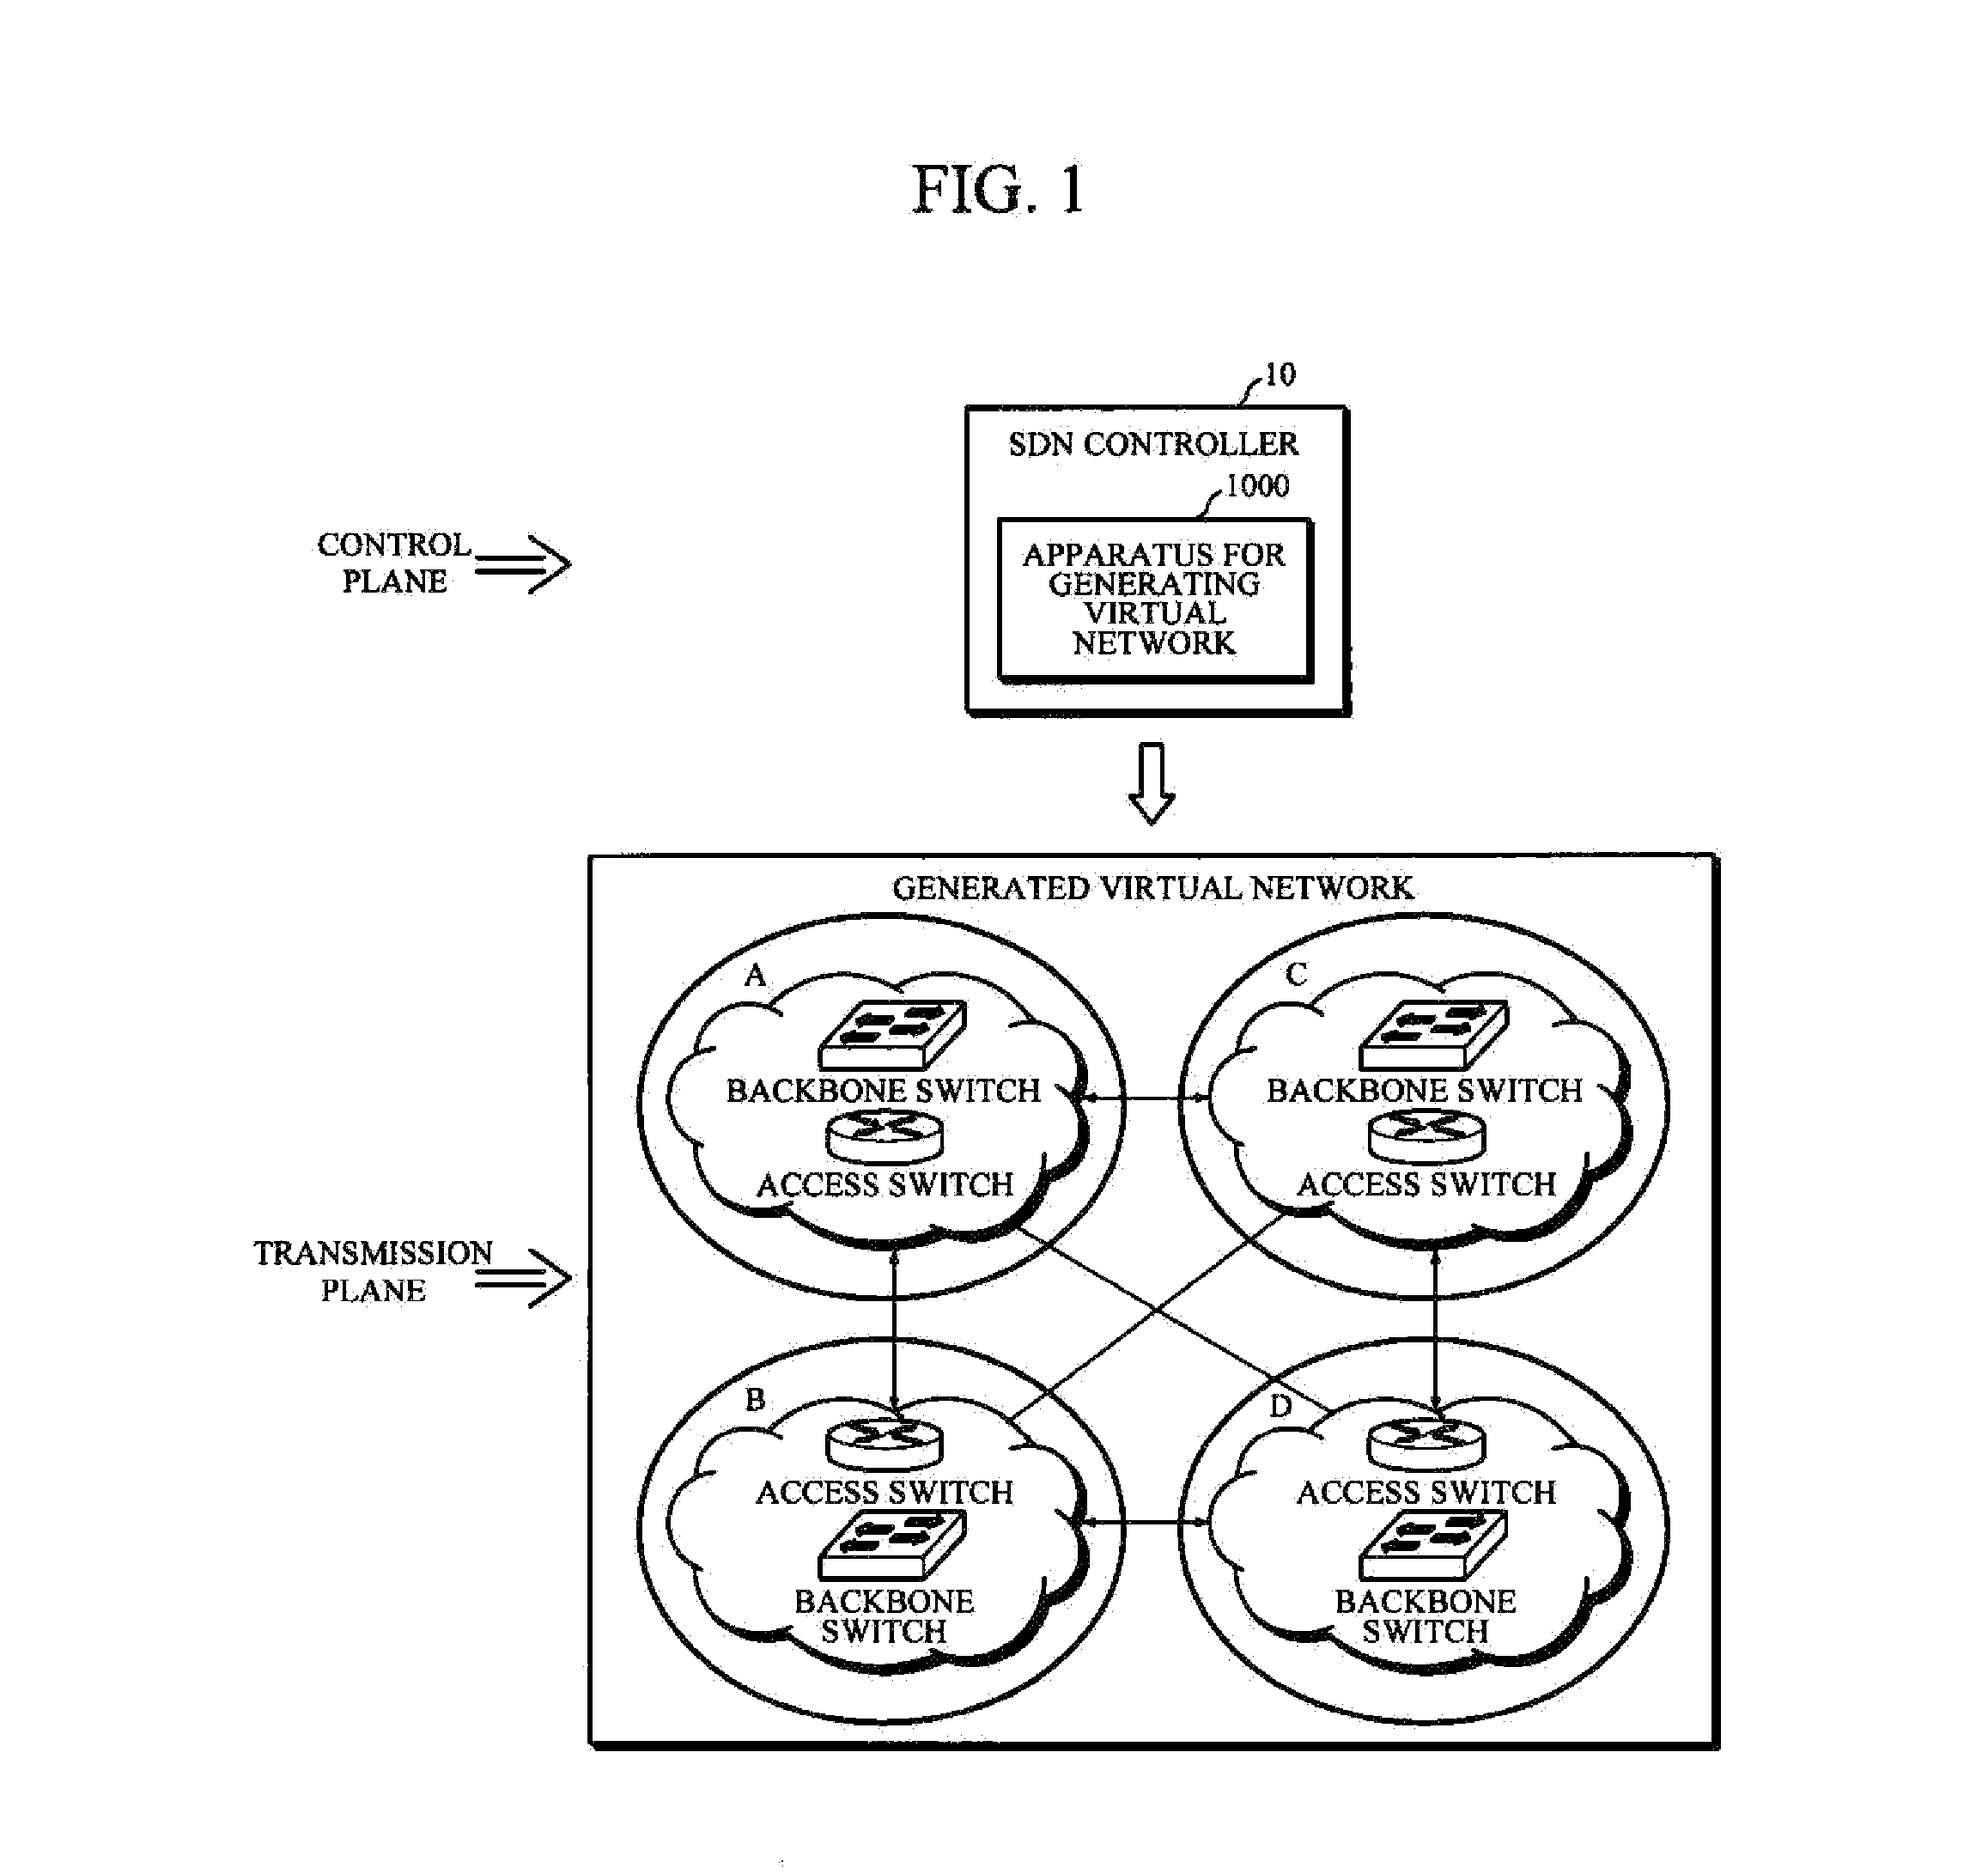 Apparauts and method for generating software defined network(SDN)-based virtual network according to user demand